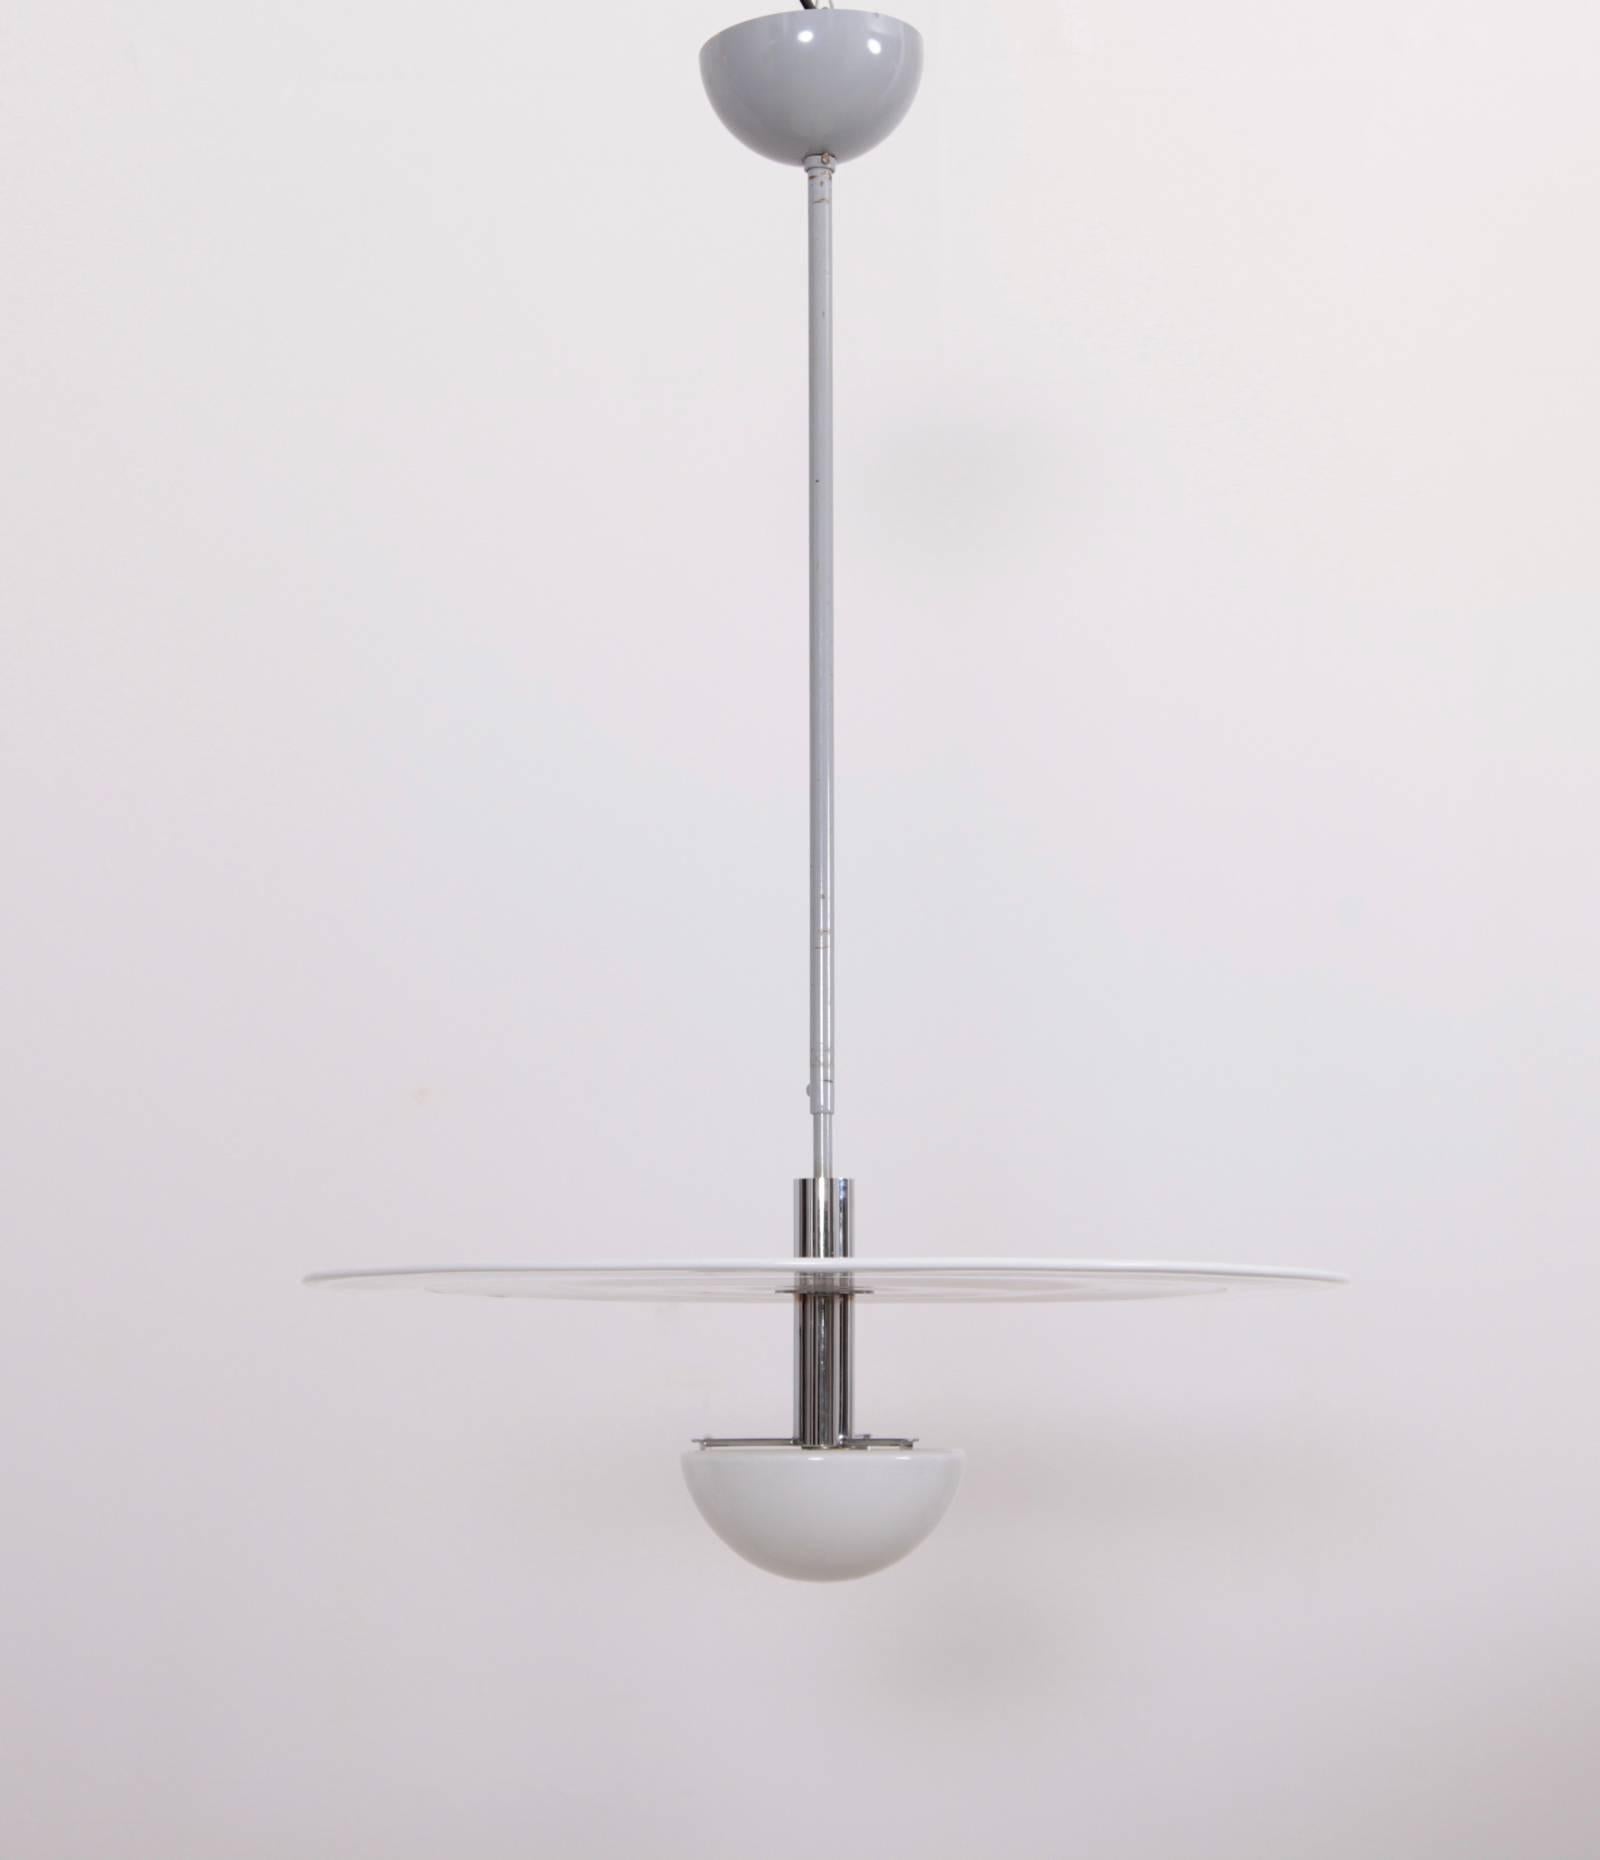 Absolute high quality minimal pendant lamp by AV Mazzega. (signed)
The white disc reflects the lamp that shines out of the glass half ball diffuser.
1x E14 bulb

